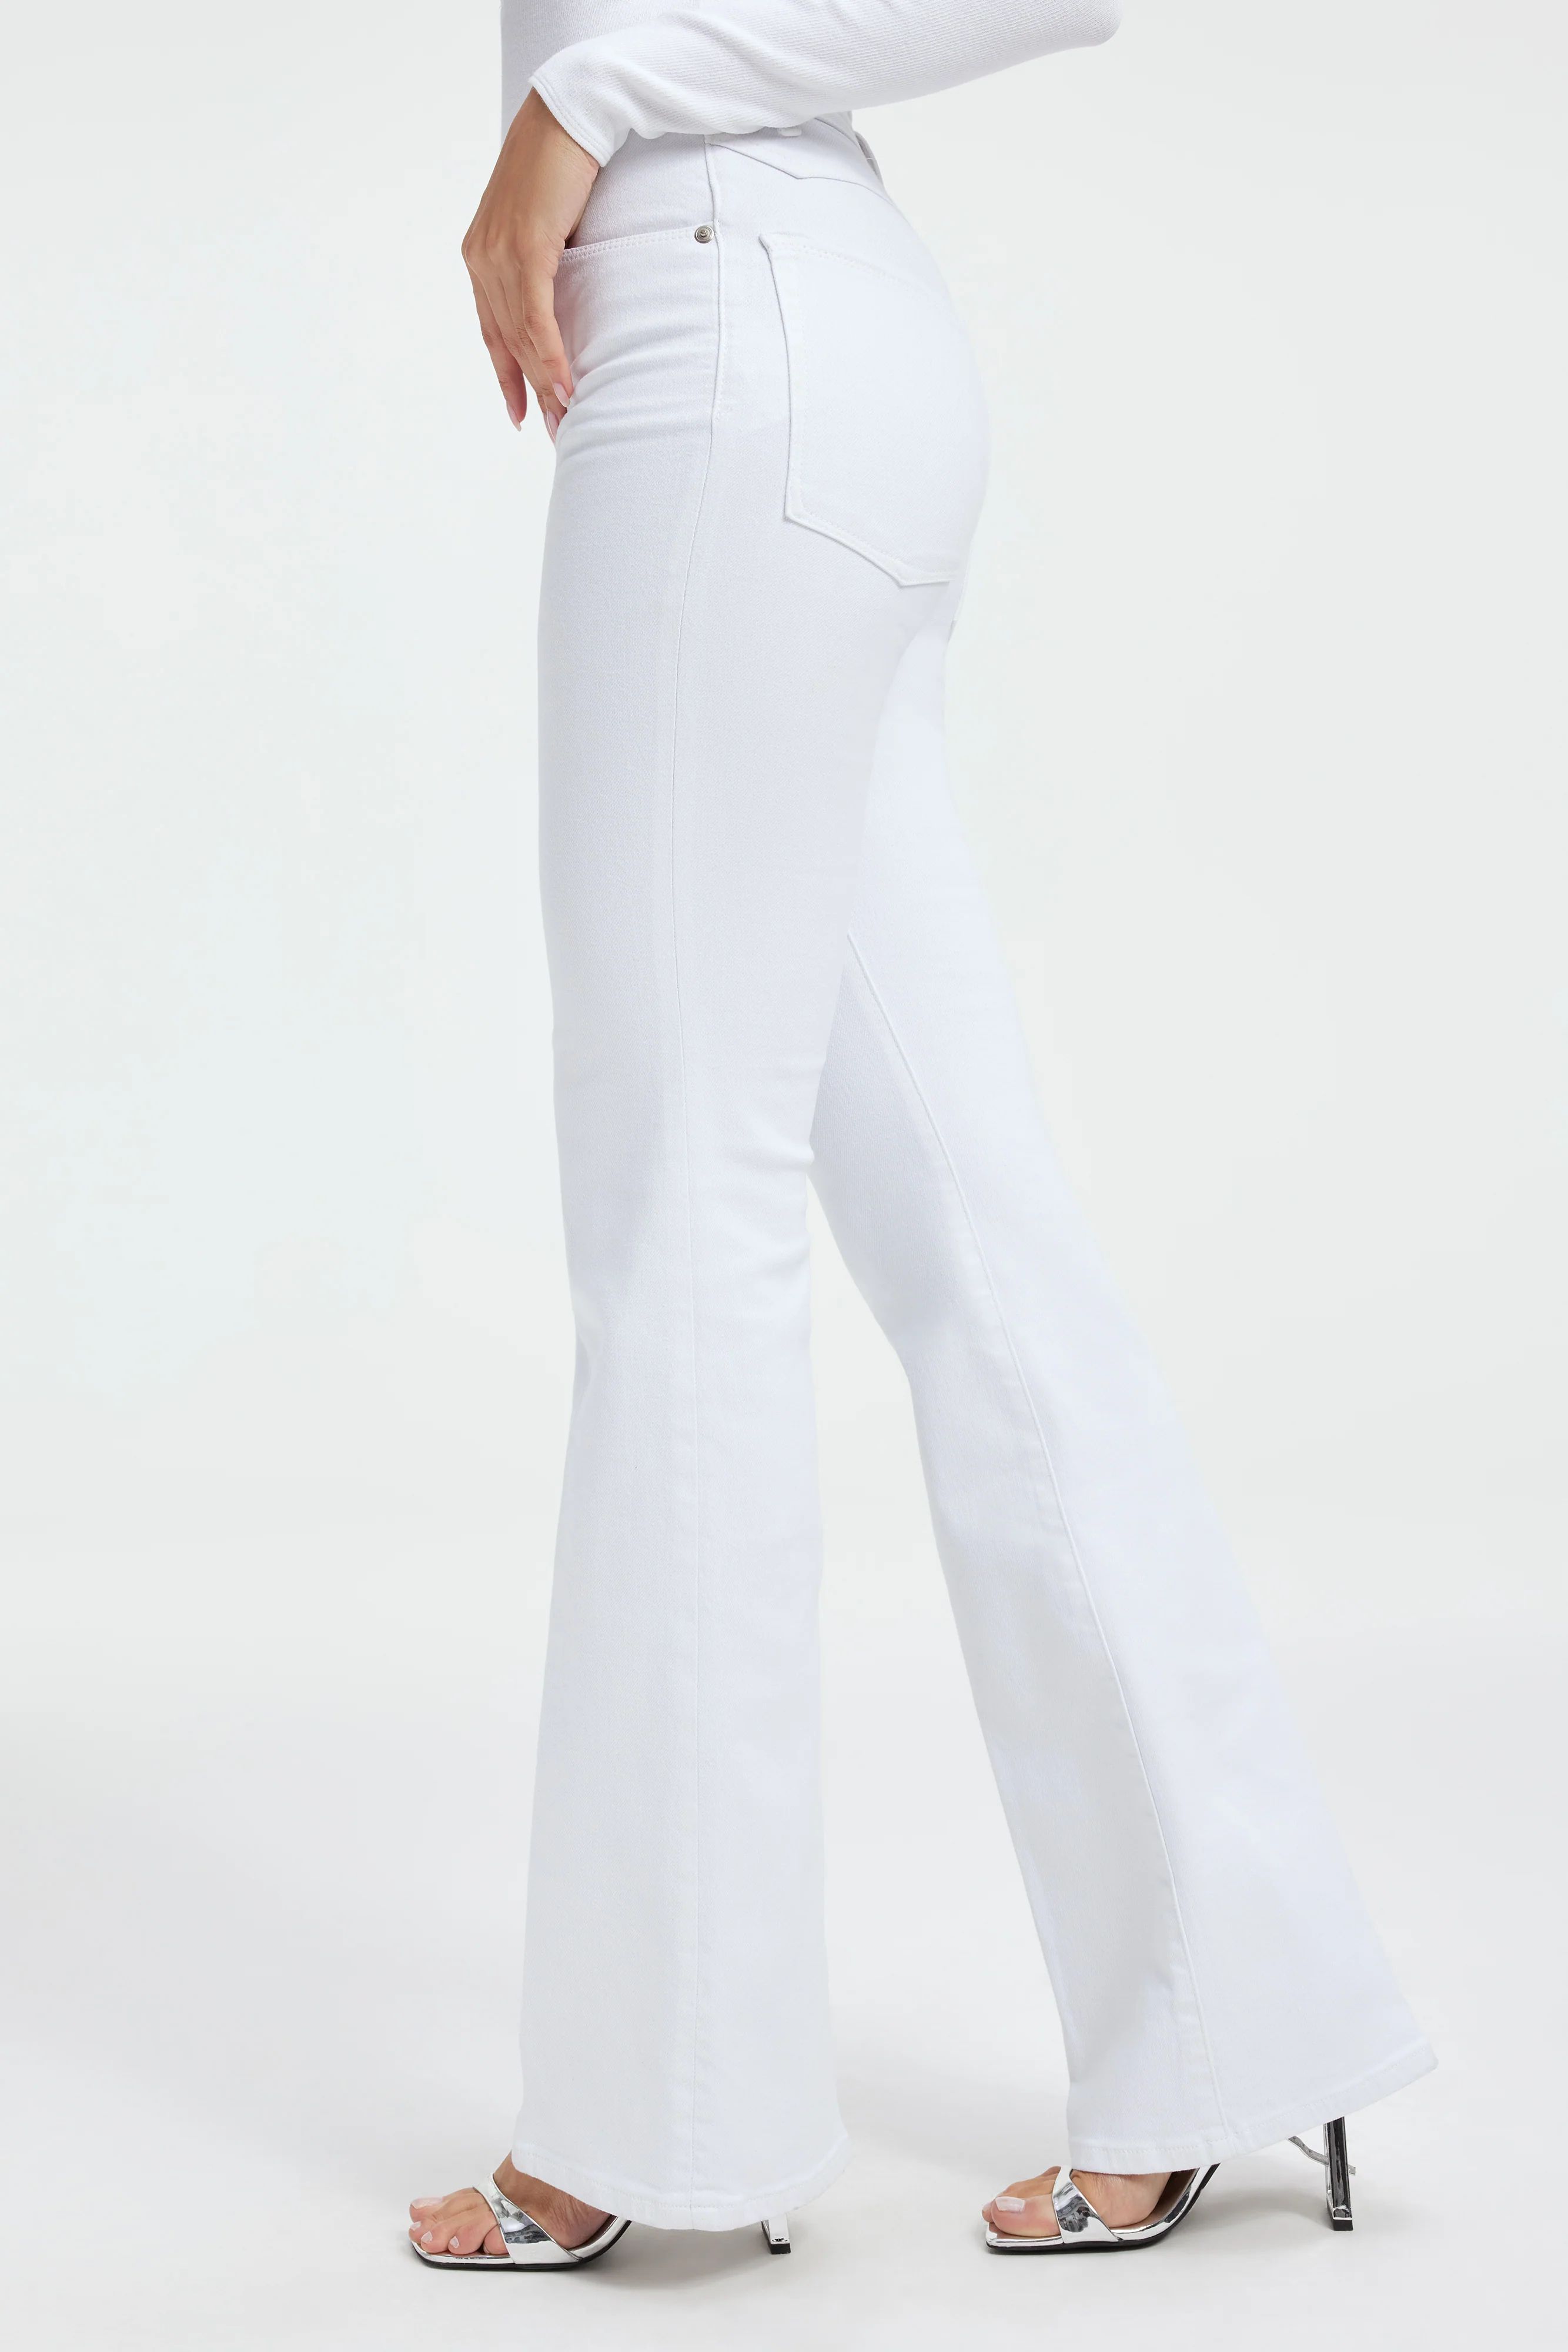 GOOD CLASSIC BOOTCUT JEANS | WHITE001 | Good American